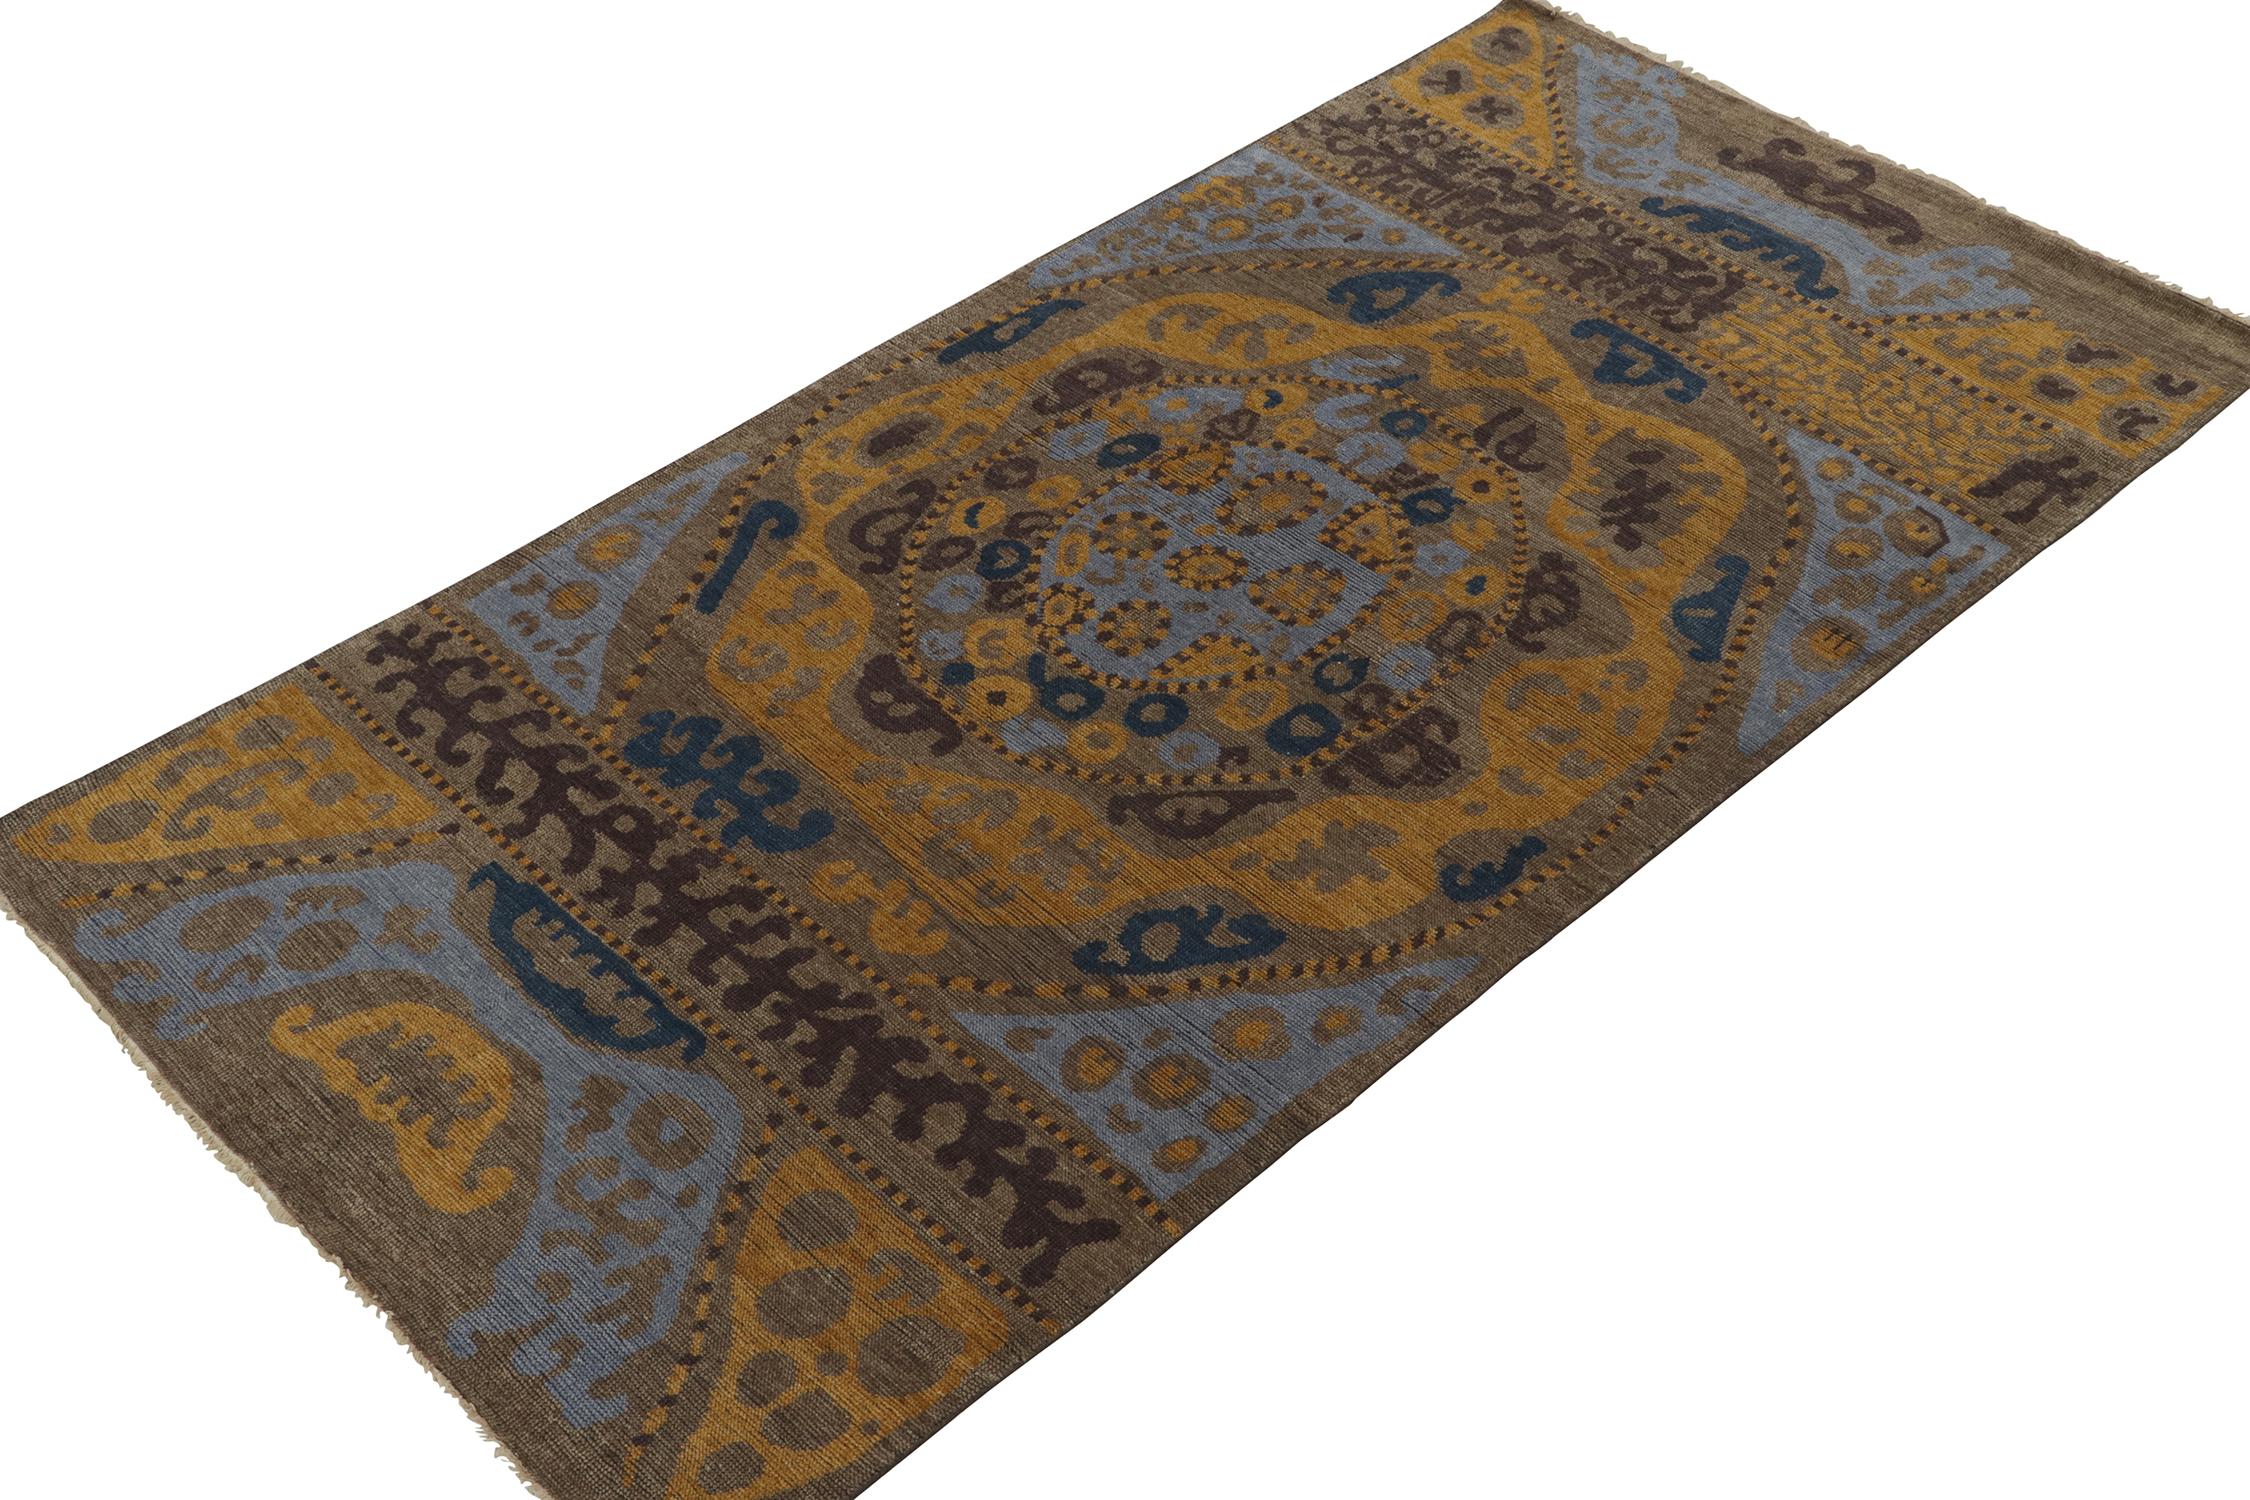 This 5x10 rug is a grand new entry to Rug & Kilim’s custom classics Burano collection. Hand-knotted in Persian wool.
Further on the Design: 
This piece draws on tribal textiles, and revels in rich brown with funky golds and blues of playful, yet